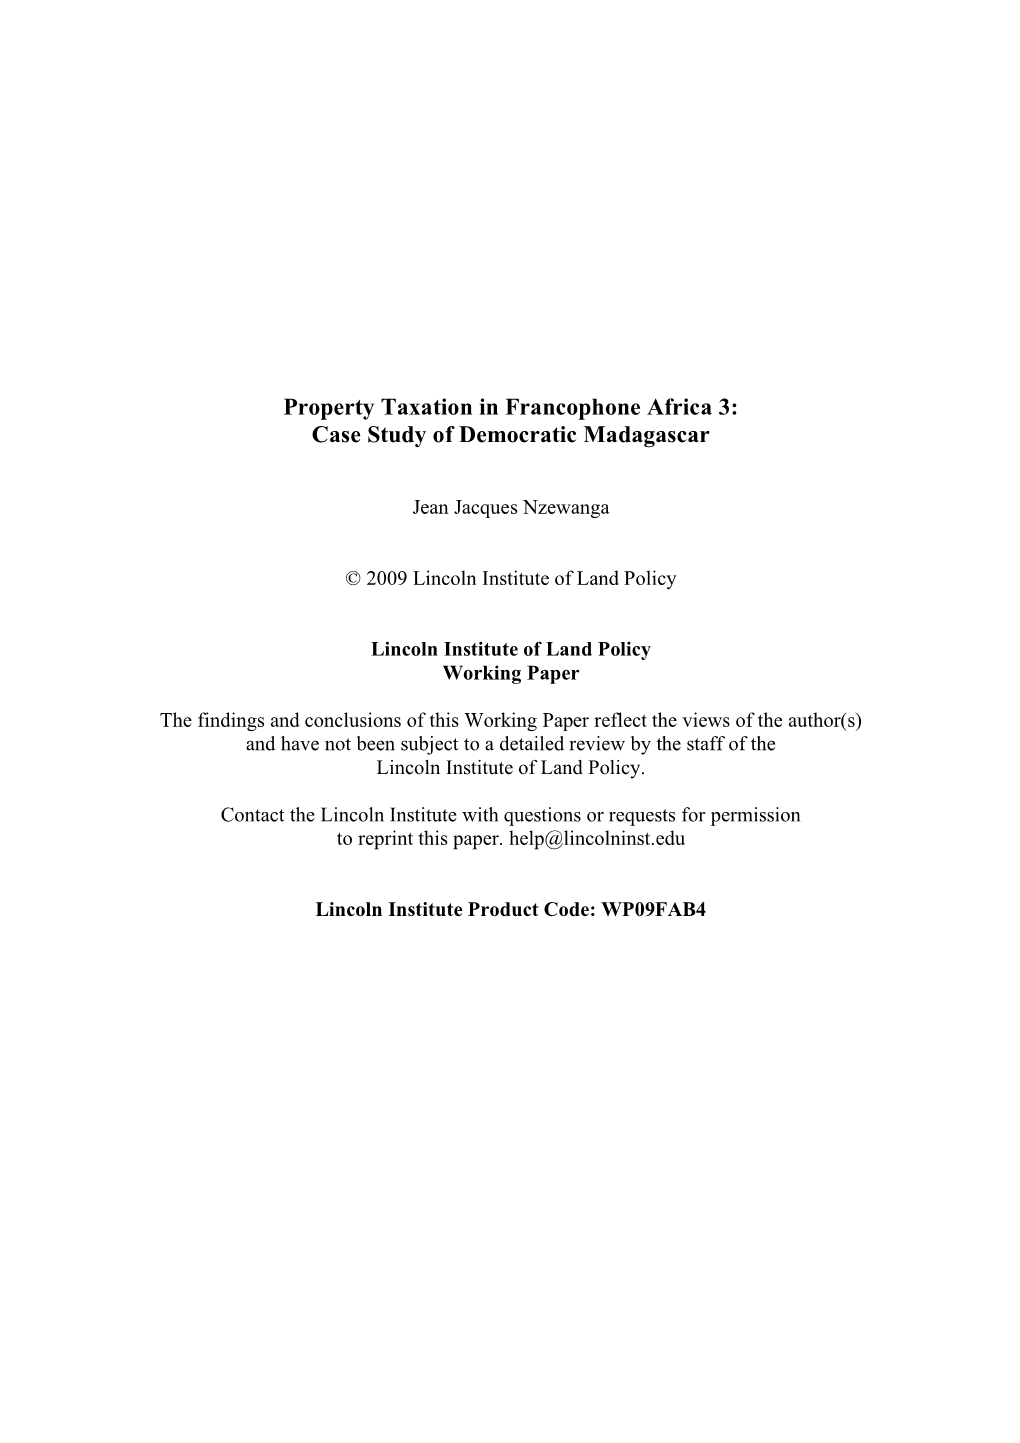 Property Taxation in Francophone Africa 3: Case Study of Democratic Madagascar